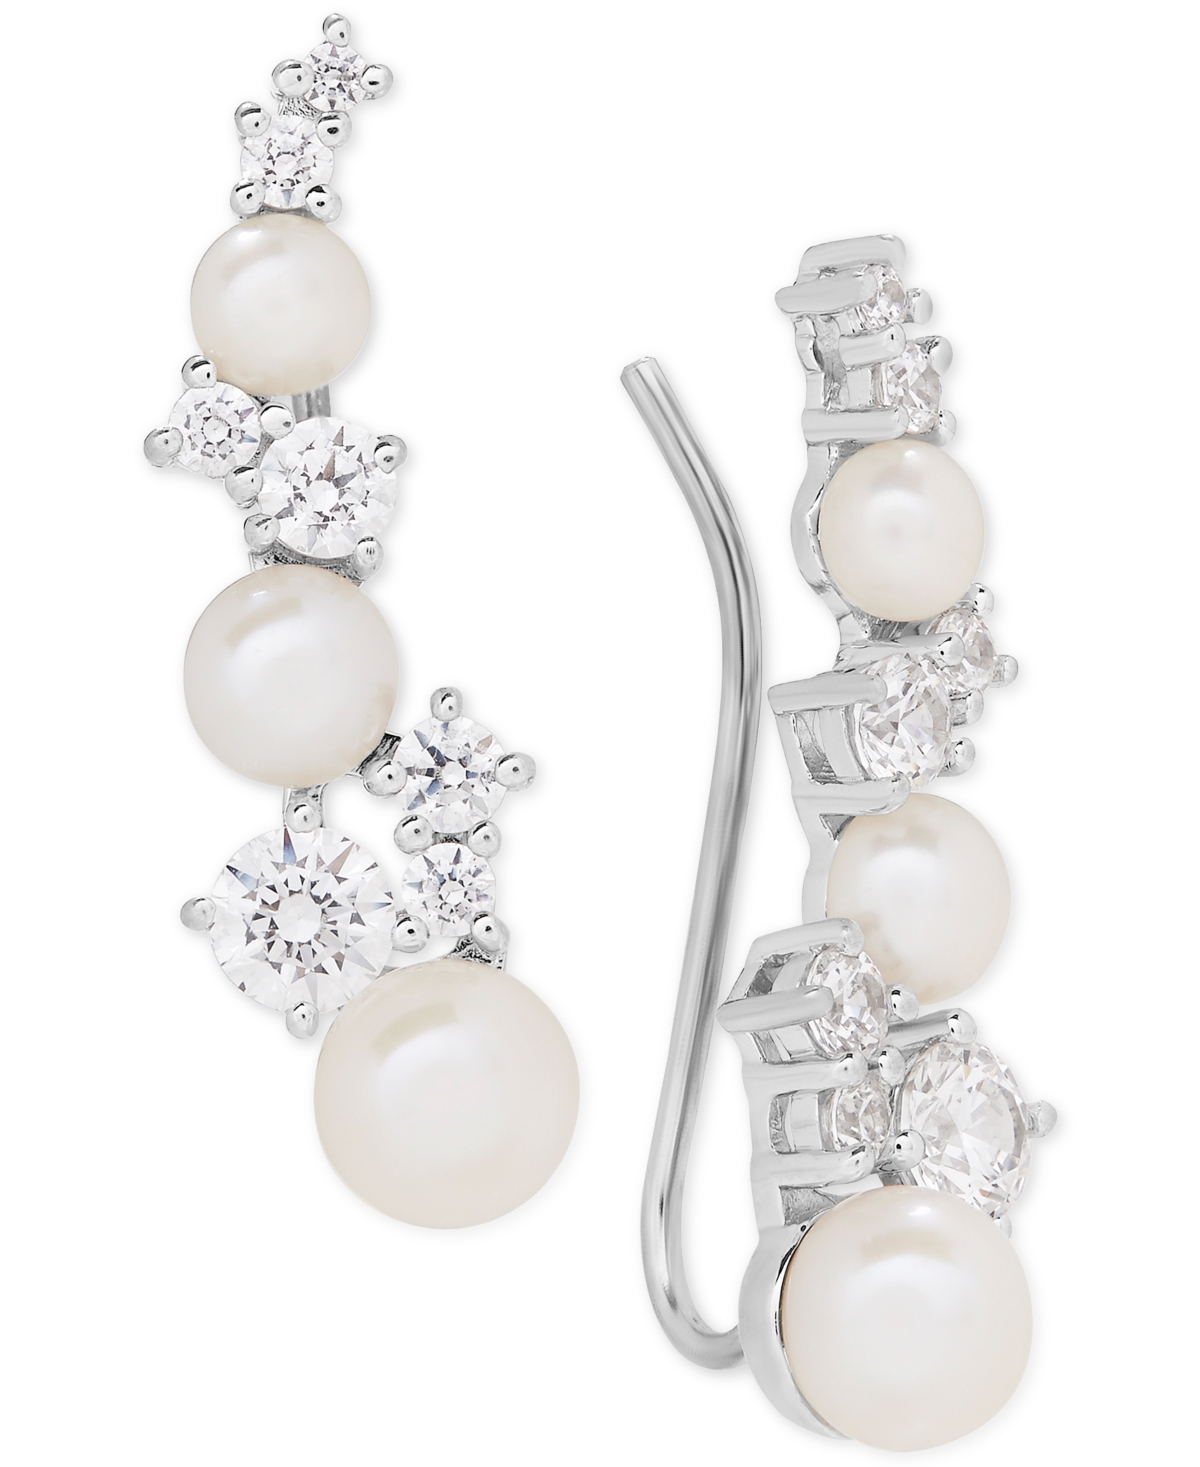 Cultured Freshwater Pearl (3-1/2 - 5-1/2mm) & Cubic Zirconia Ear Climbers in Sterling Silver, Created for Macy's - Silver